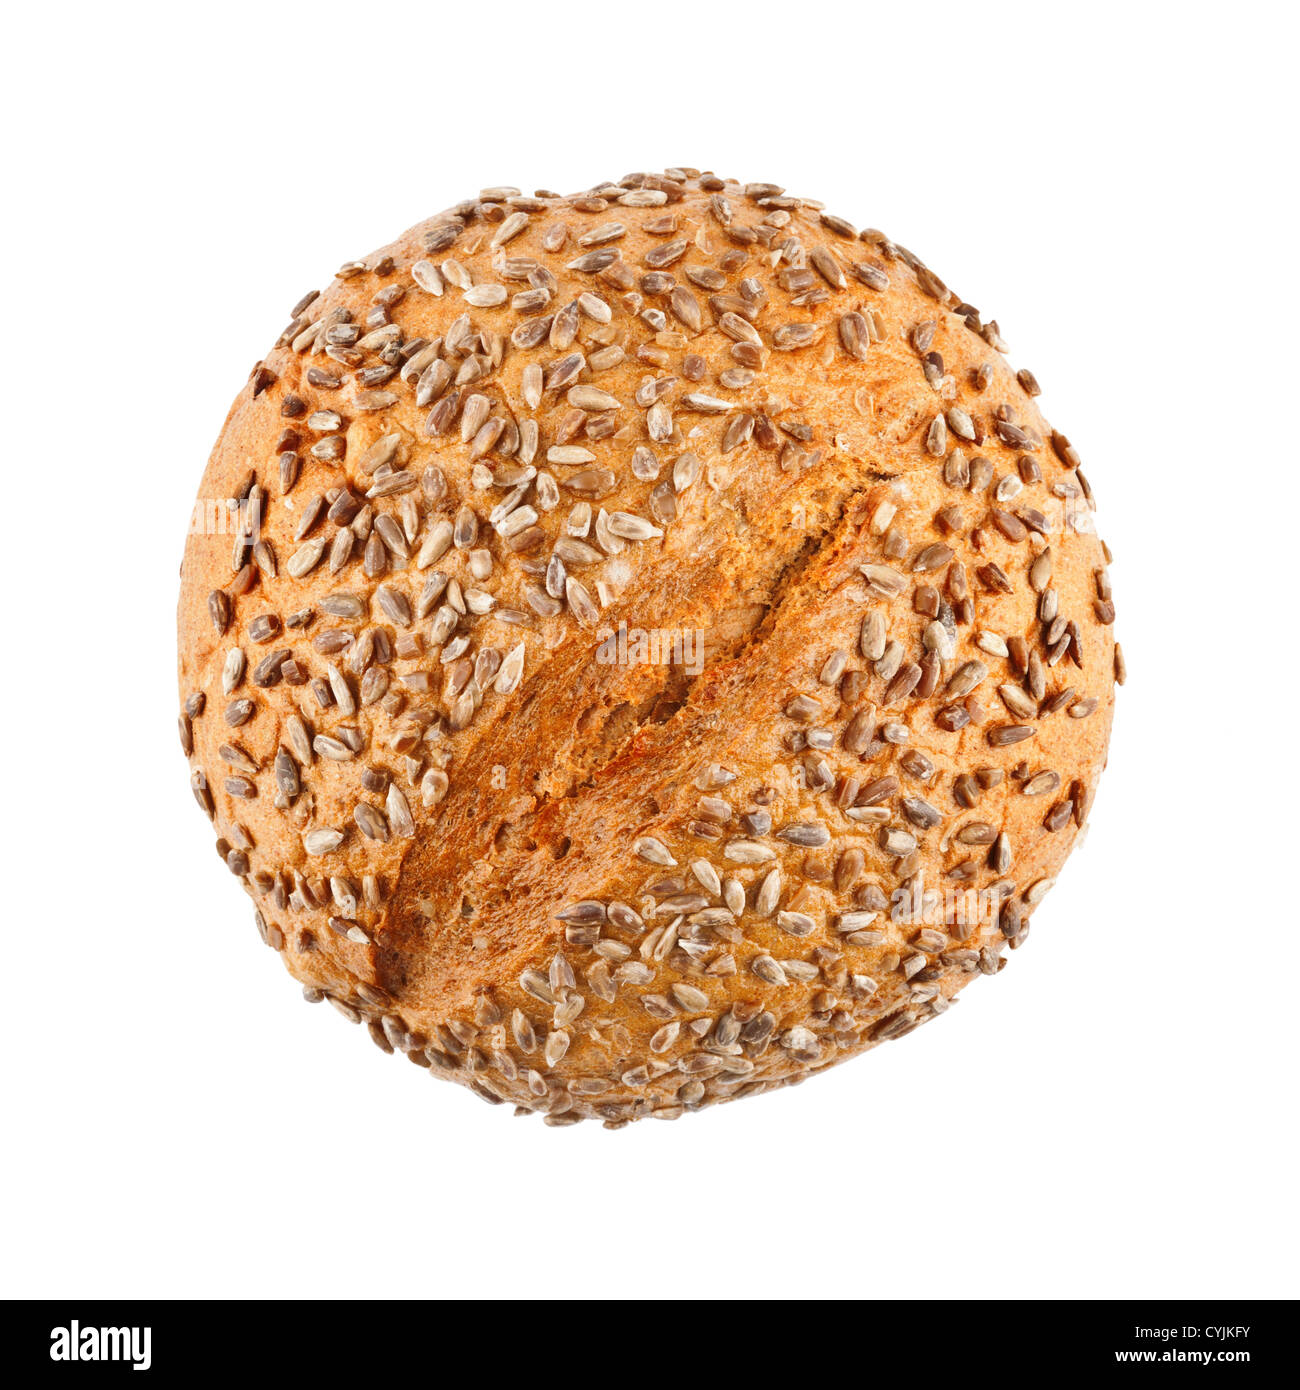 A loaf of delicious homemade bread with sunflower seeds isolated on white background Stock Photo